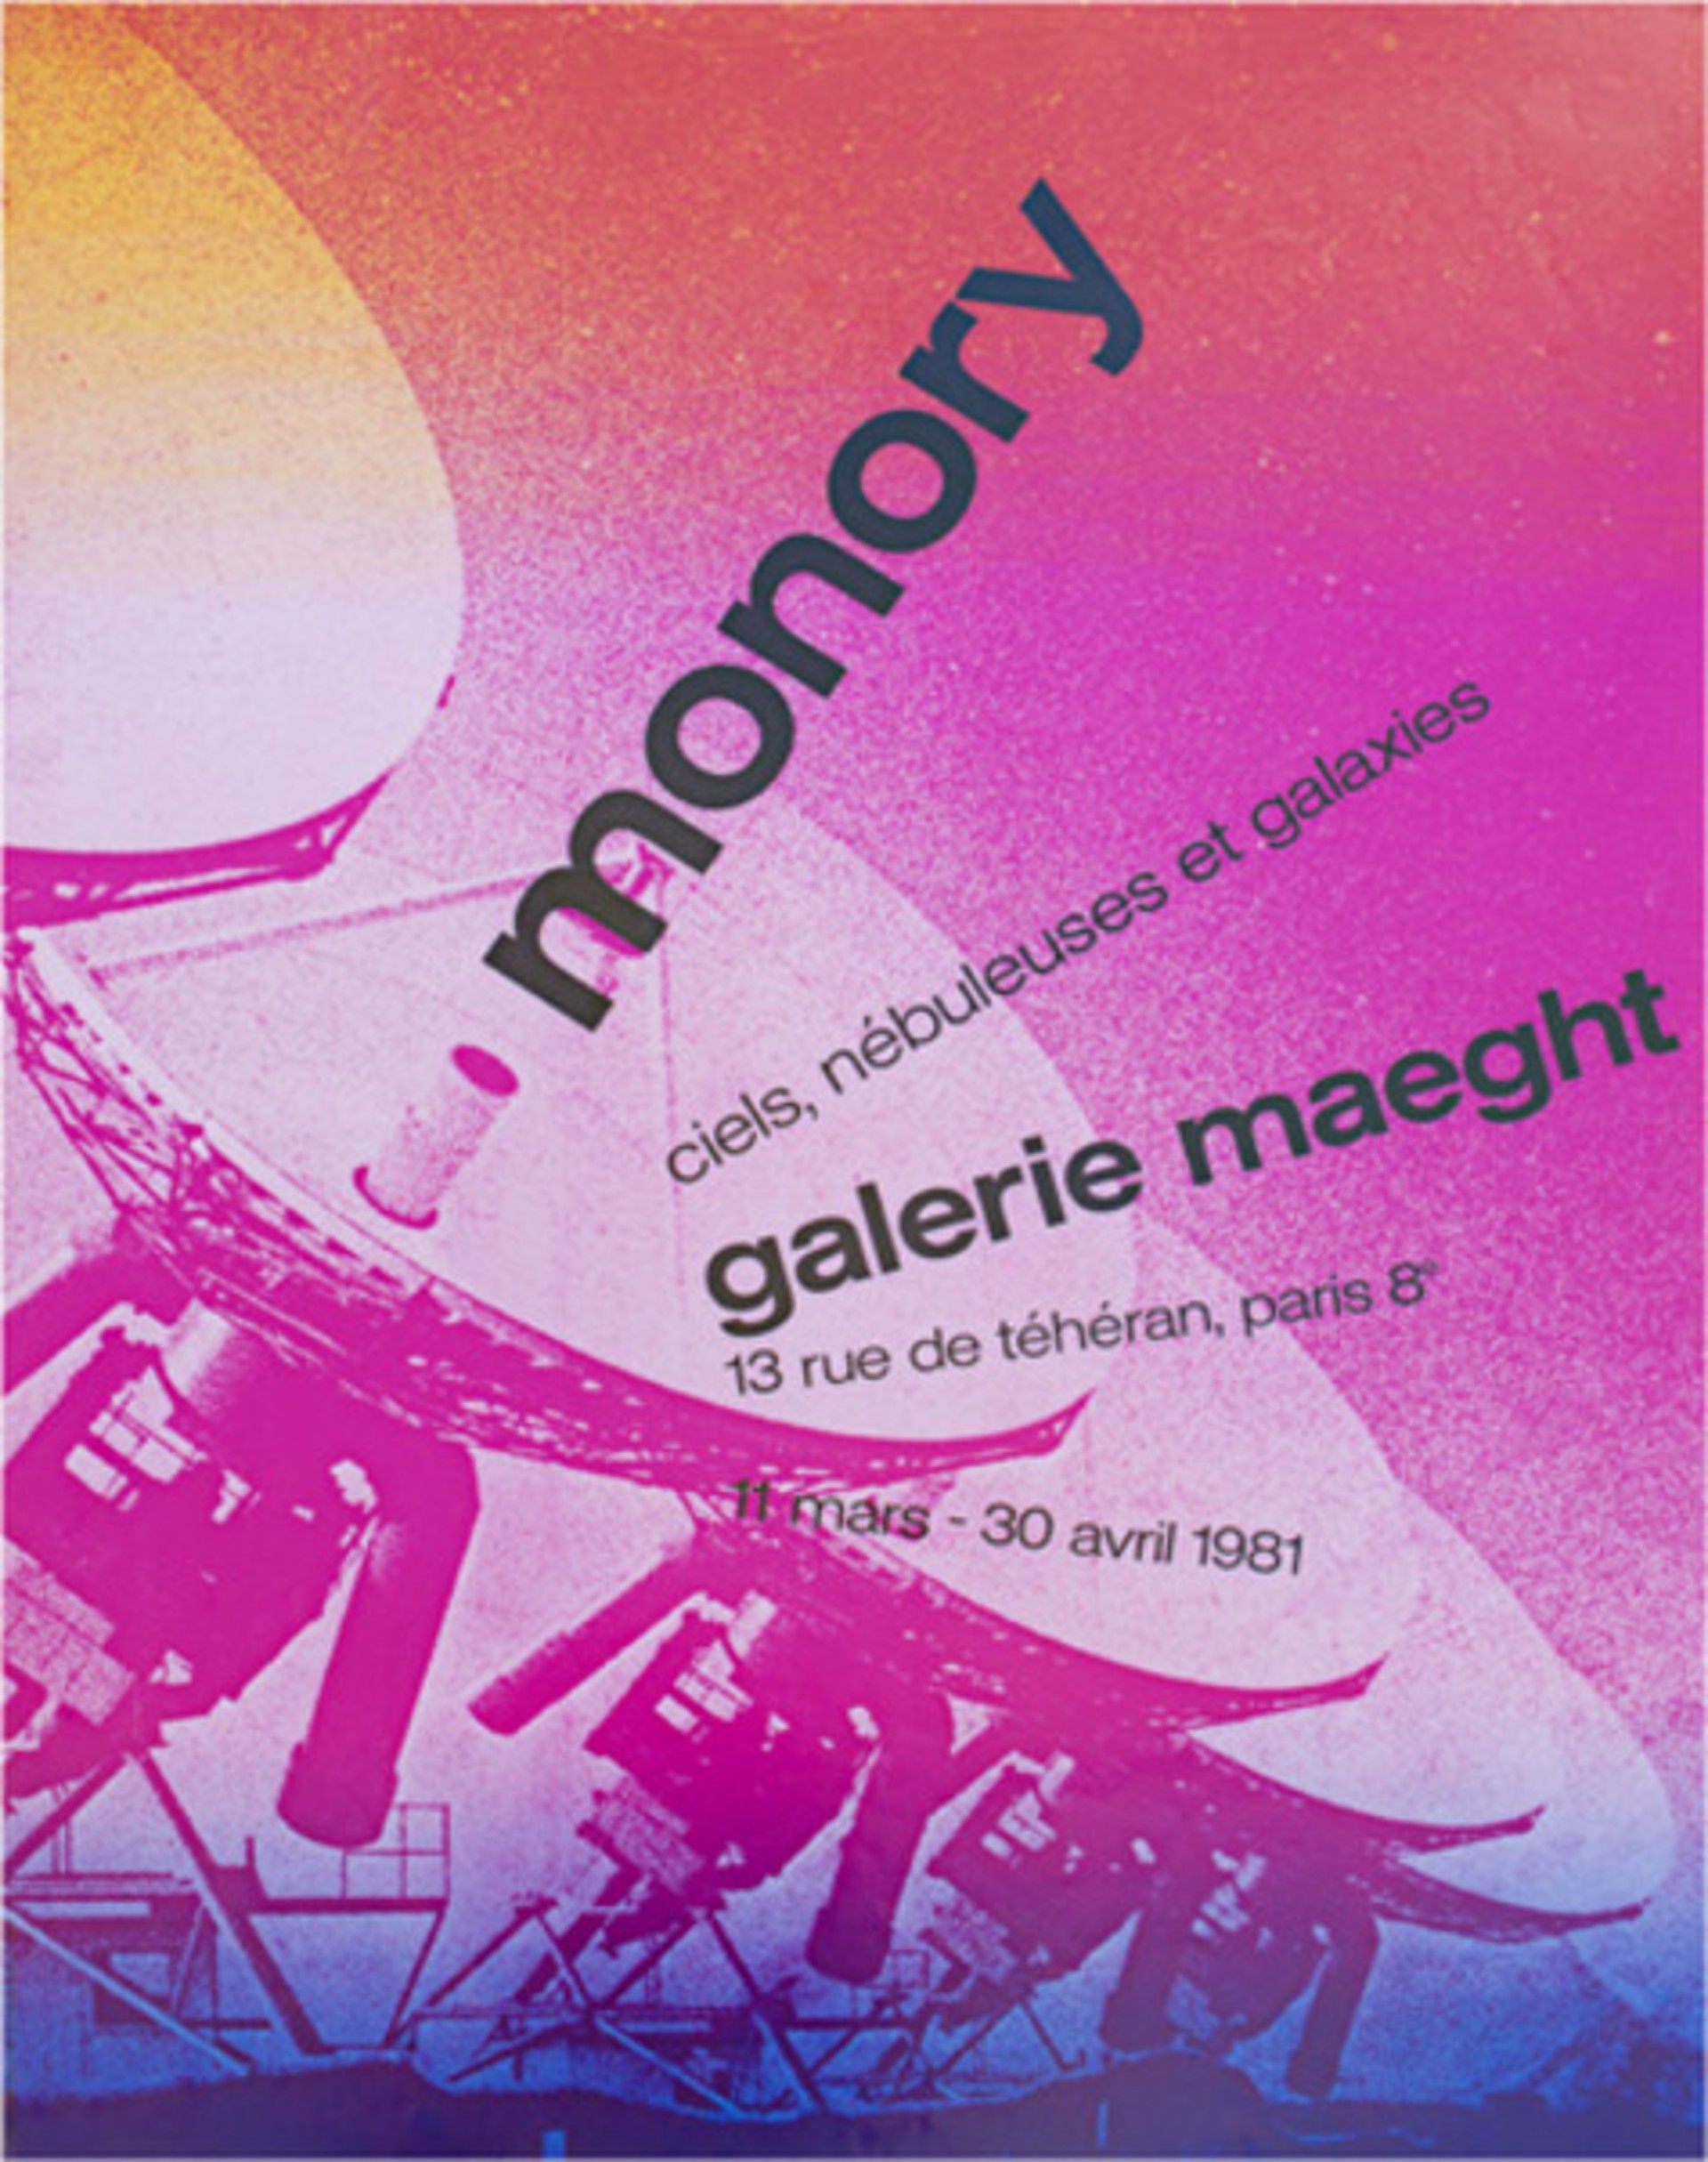 Monory - Galerie Maeght by Jacques Monory